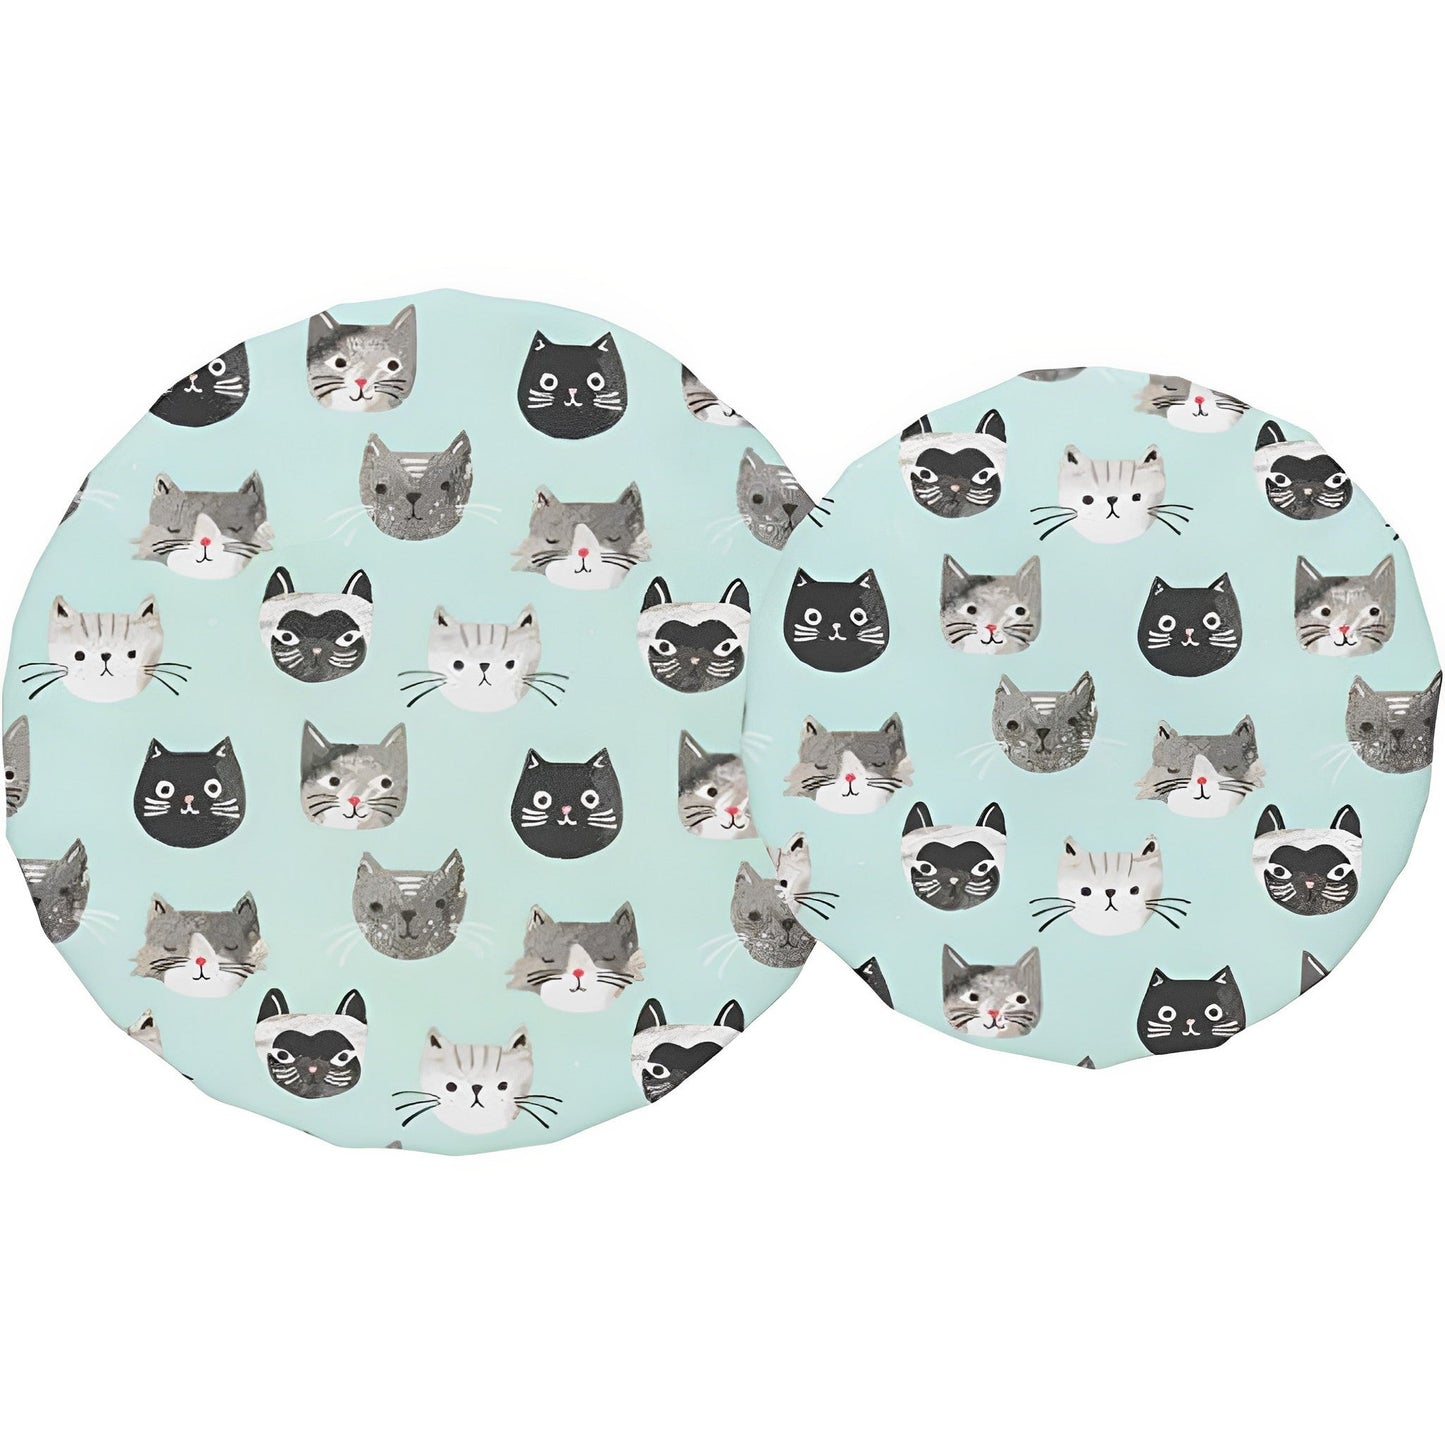 "The Cats Meow": Bowl Covers (Set of 2) - Tiny Tiger Gift Shop